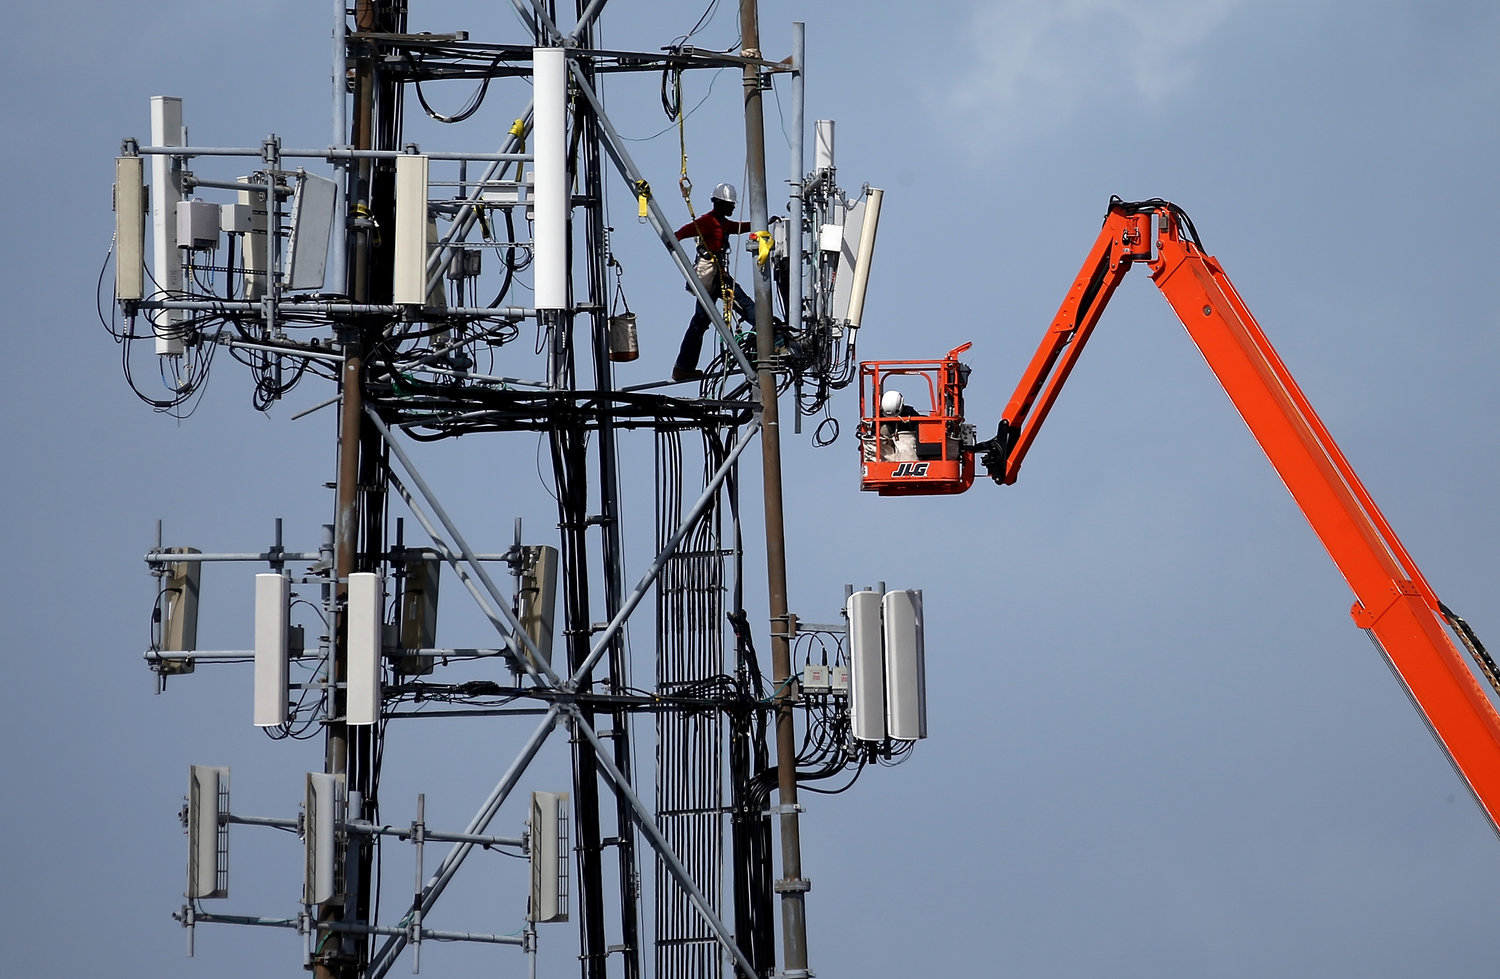 A worker on a cellular communication tower on March 6, 2014, in Oakland, California. (Justin Sullivan/Getty Images/TNS)